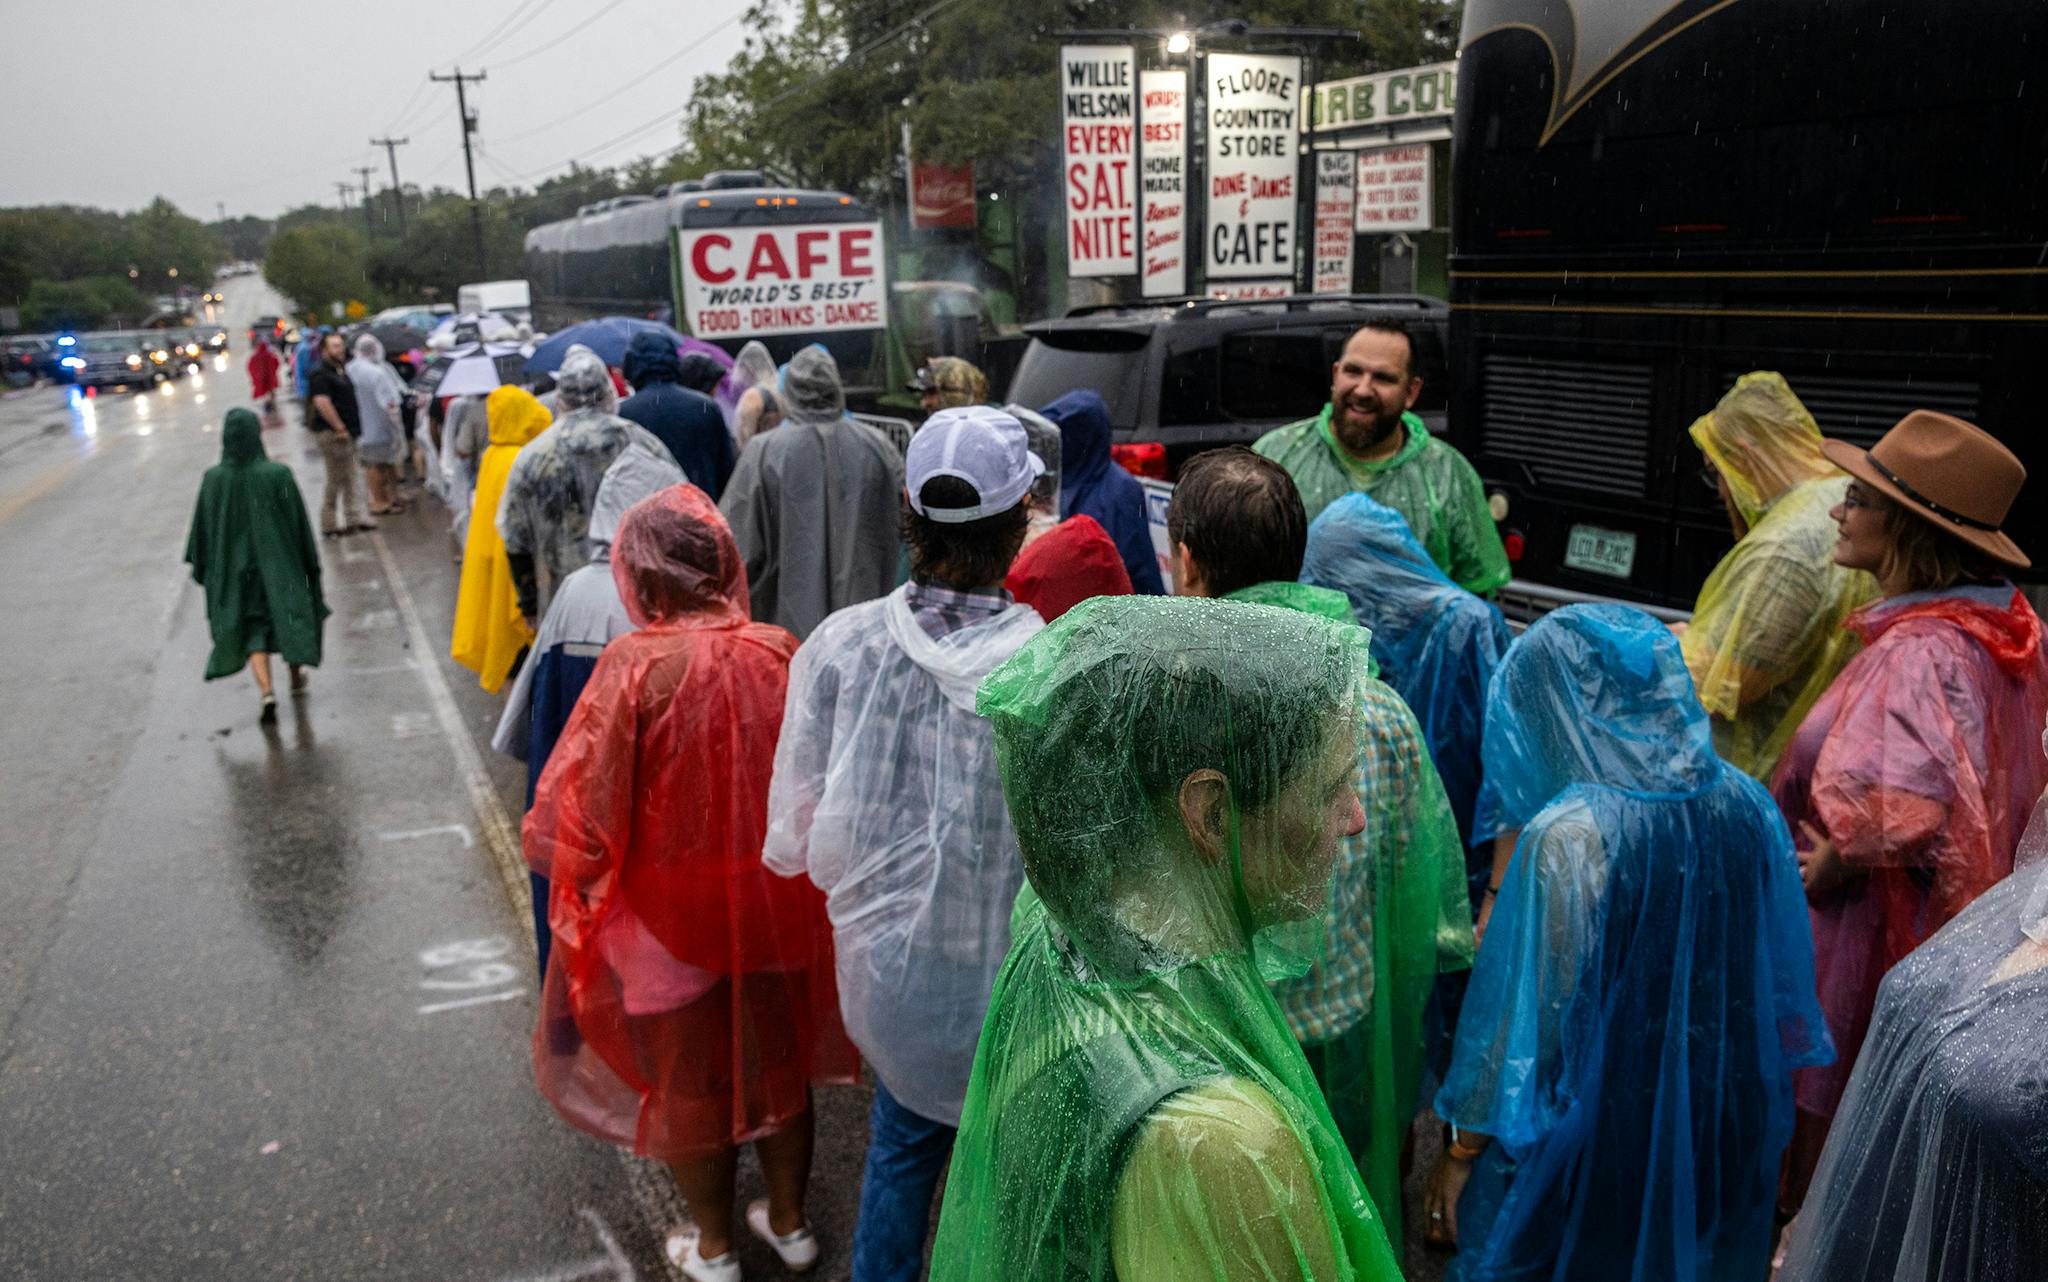 Fans line up in the rain outside of John T. Floore’s Country Store in Helotes, Texas, for Robert Earl Keen’s second to last show on Sept. 3, 2022.